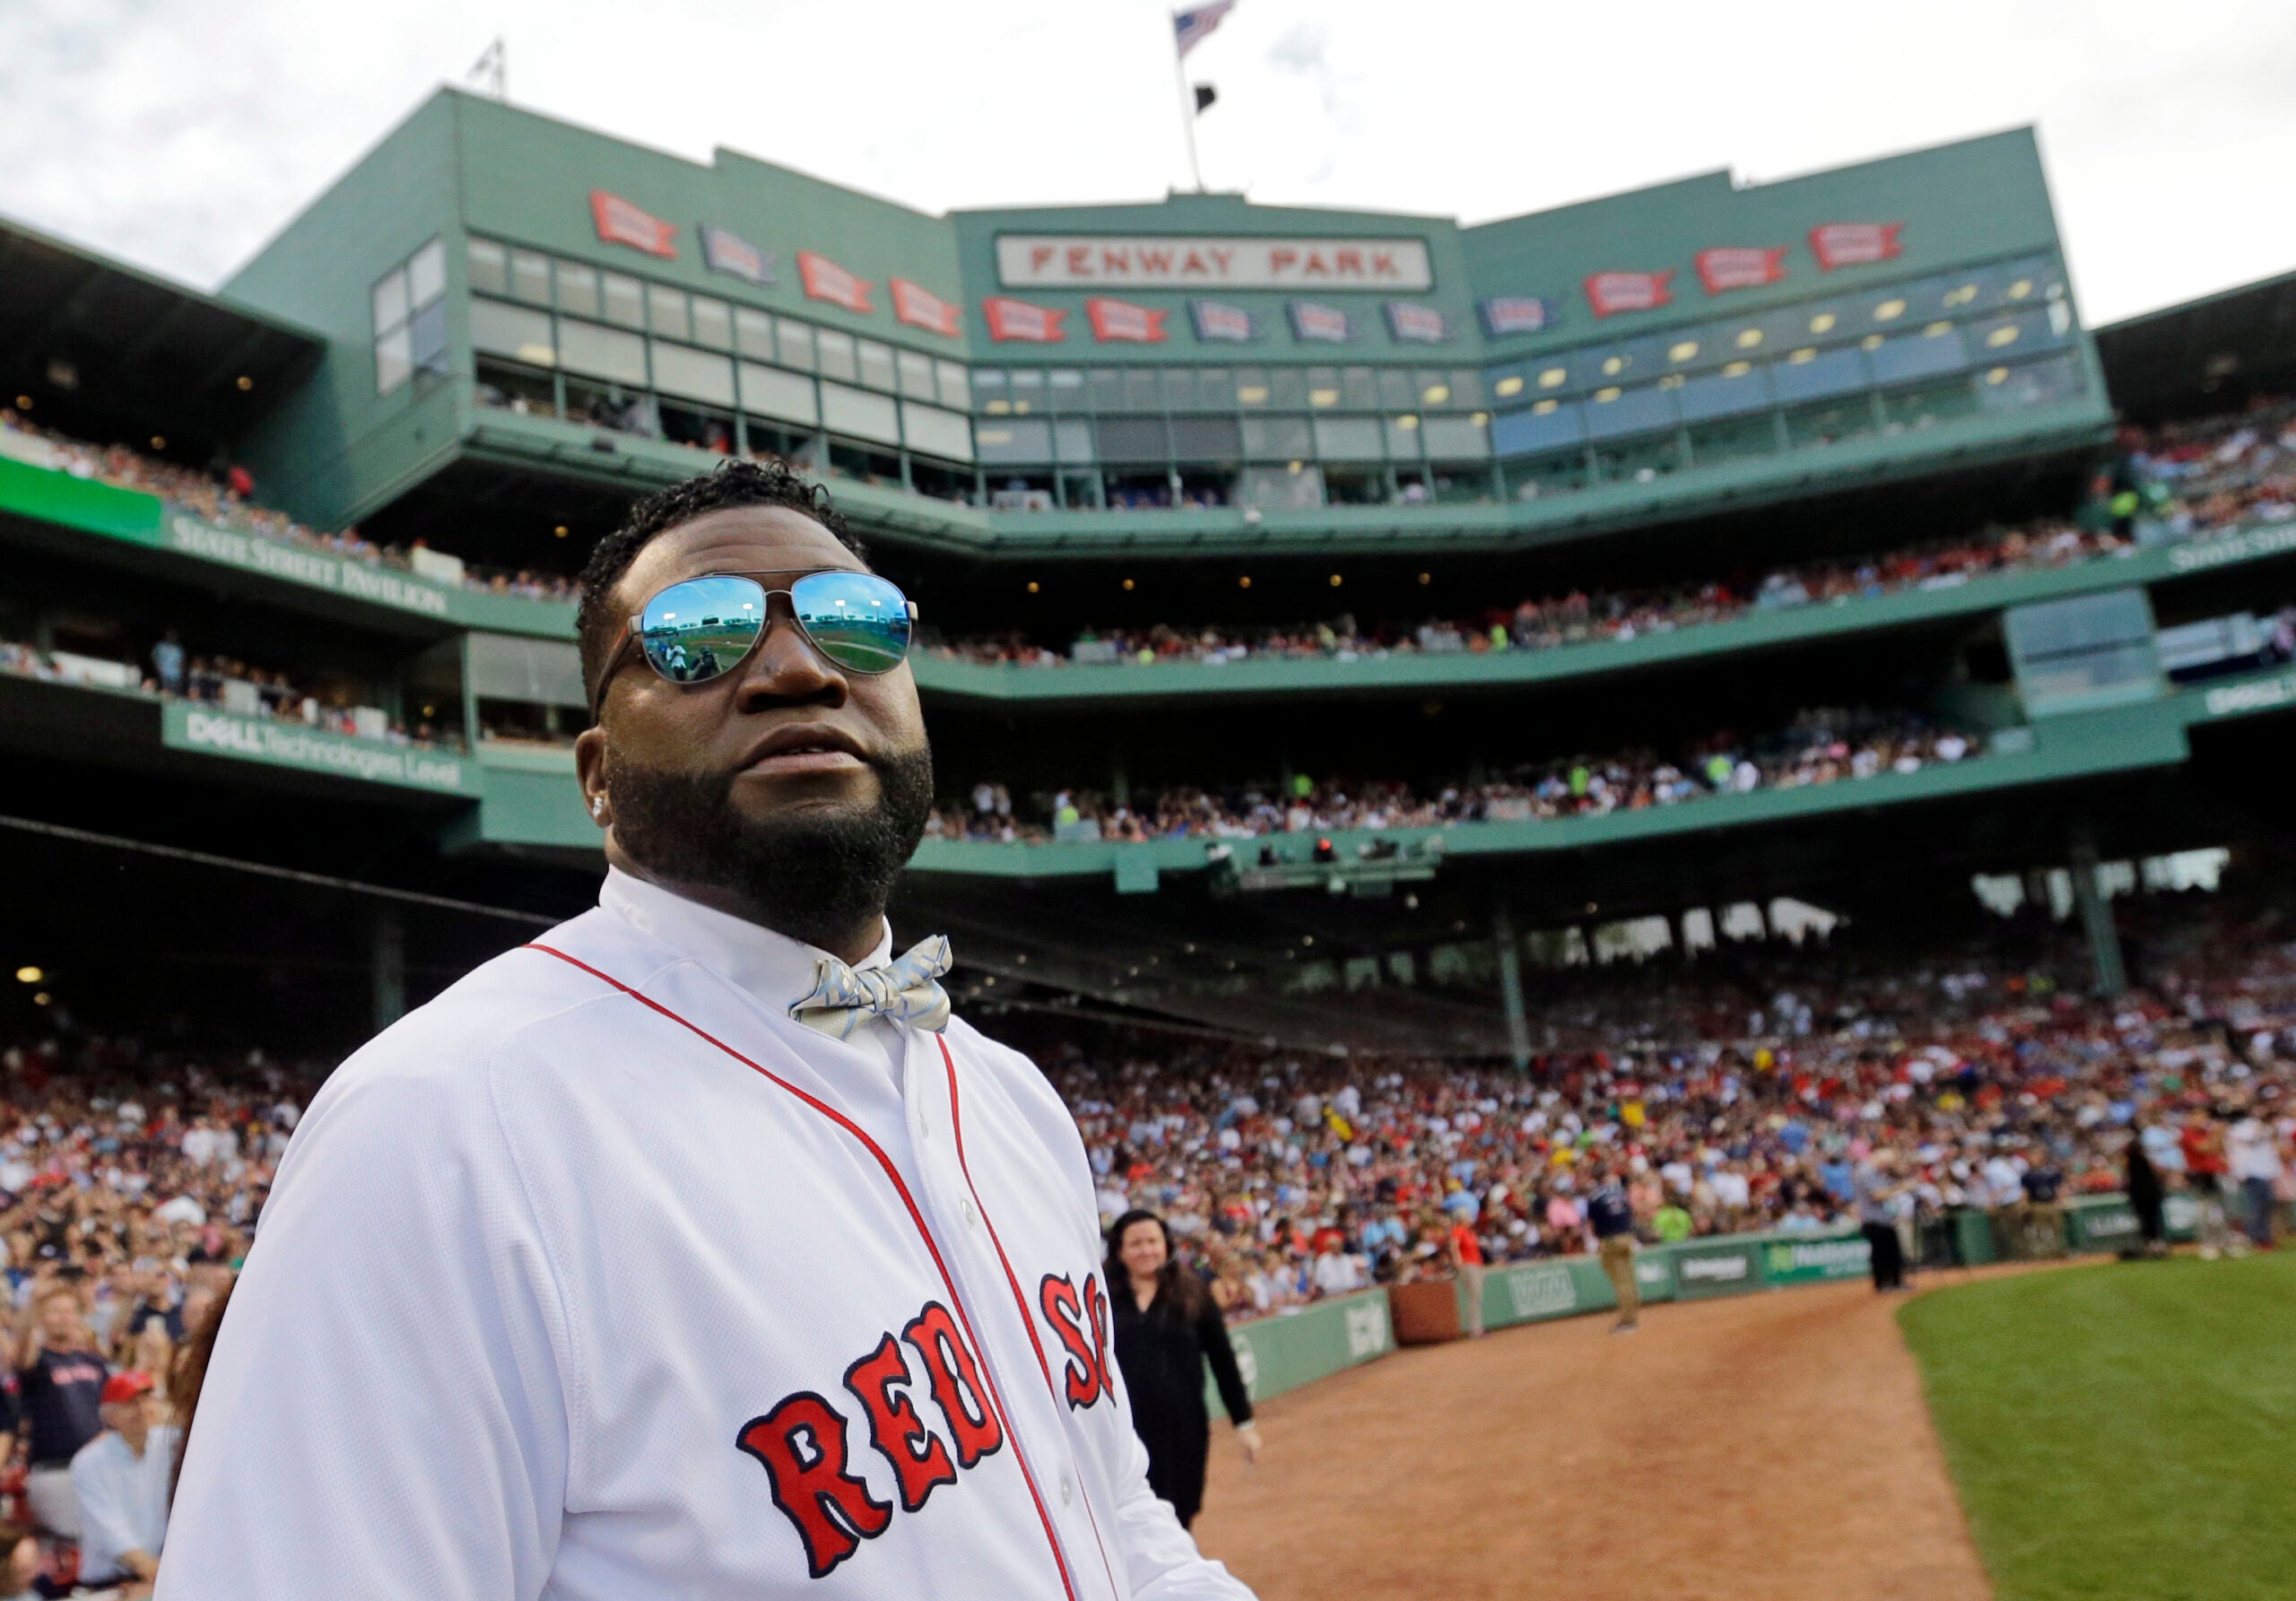 Five Red Sox players who should have their jersey numbers retired